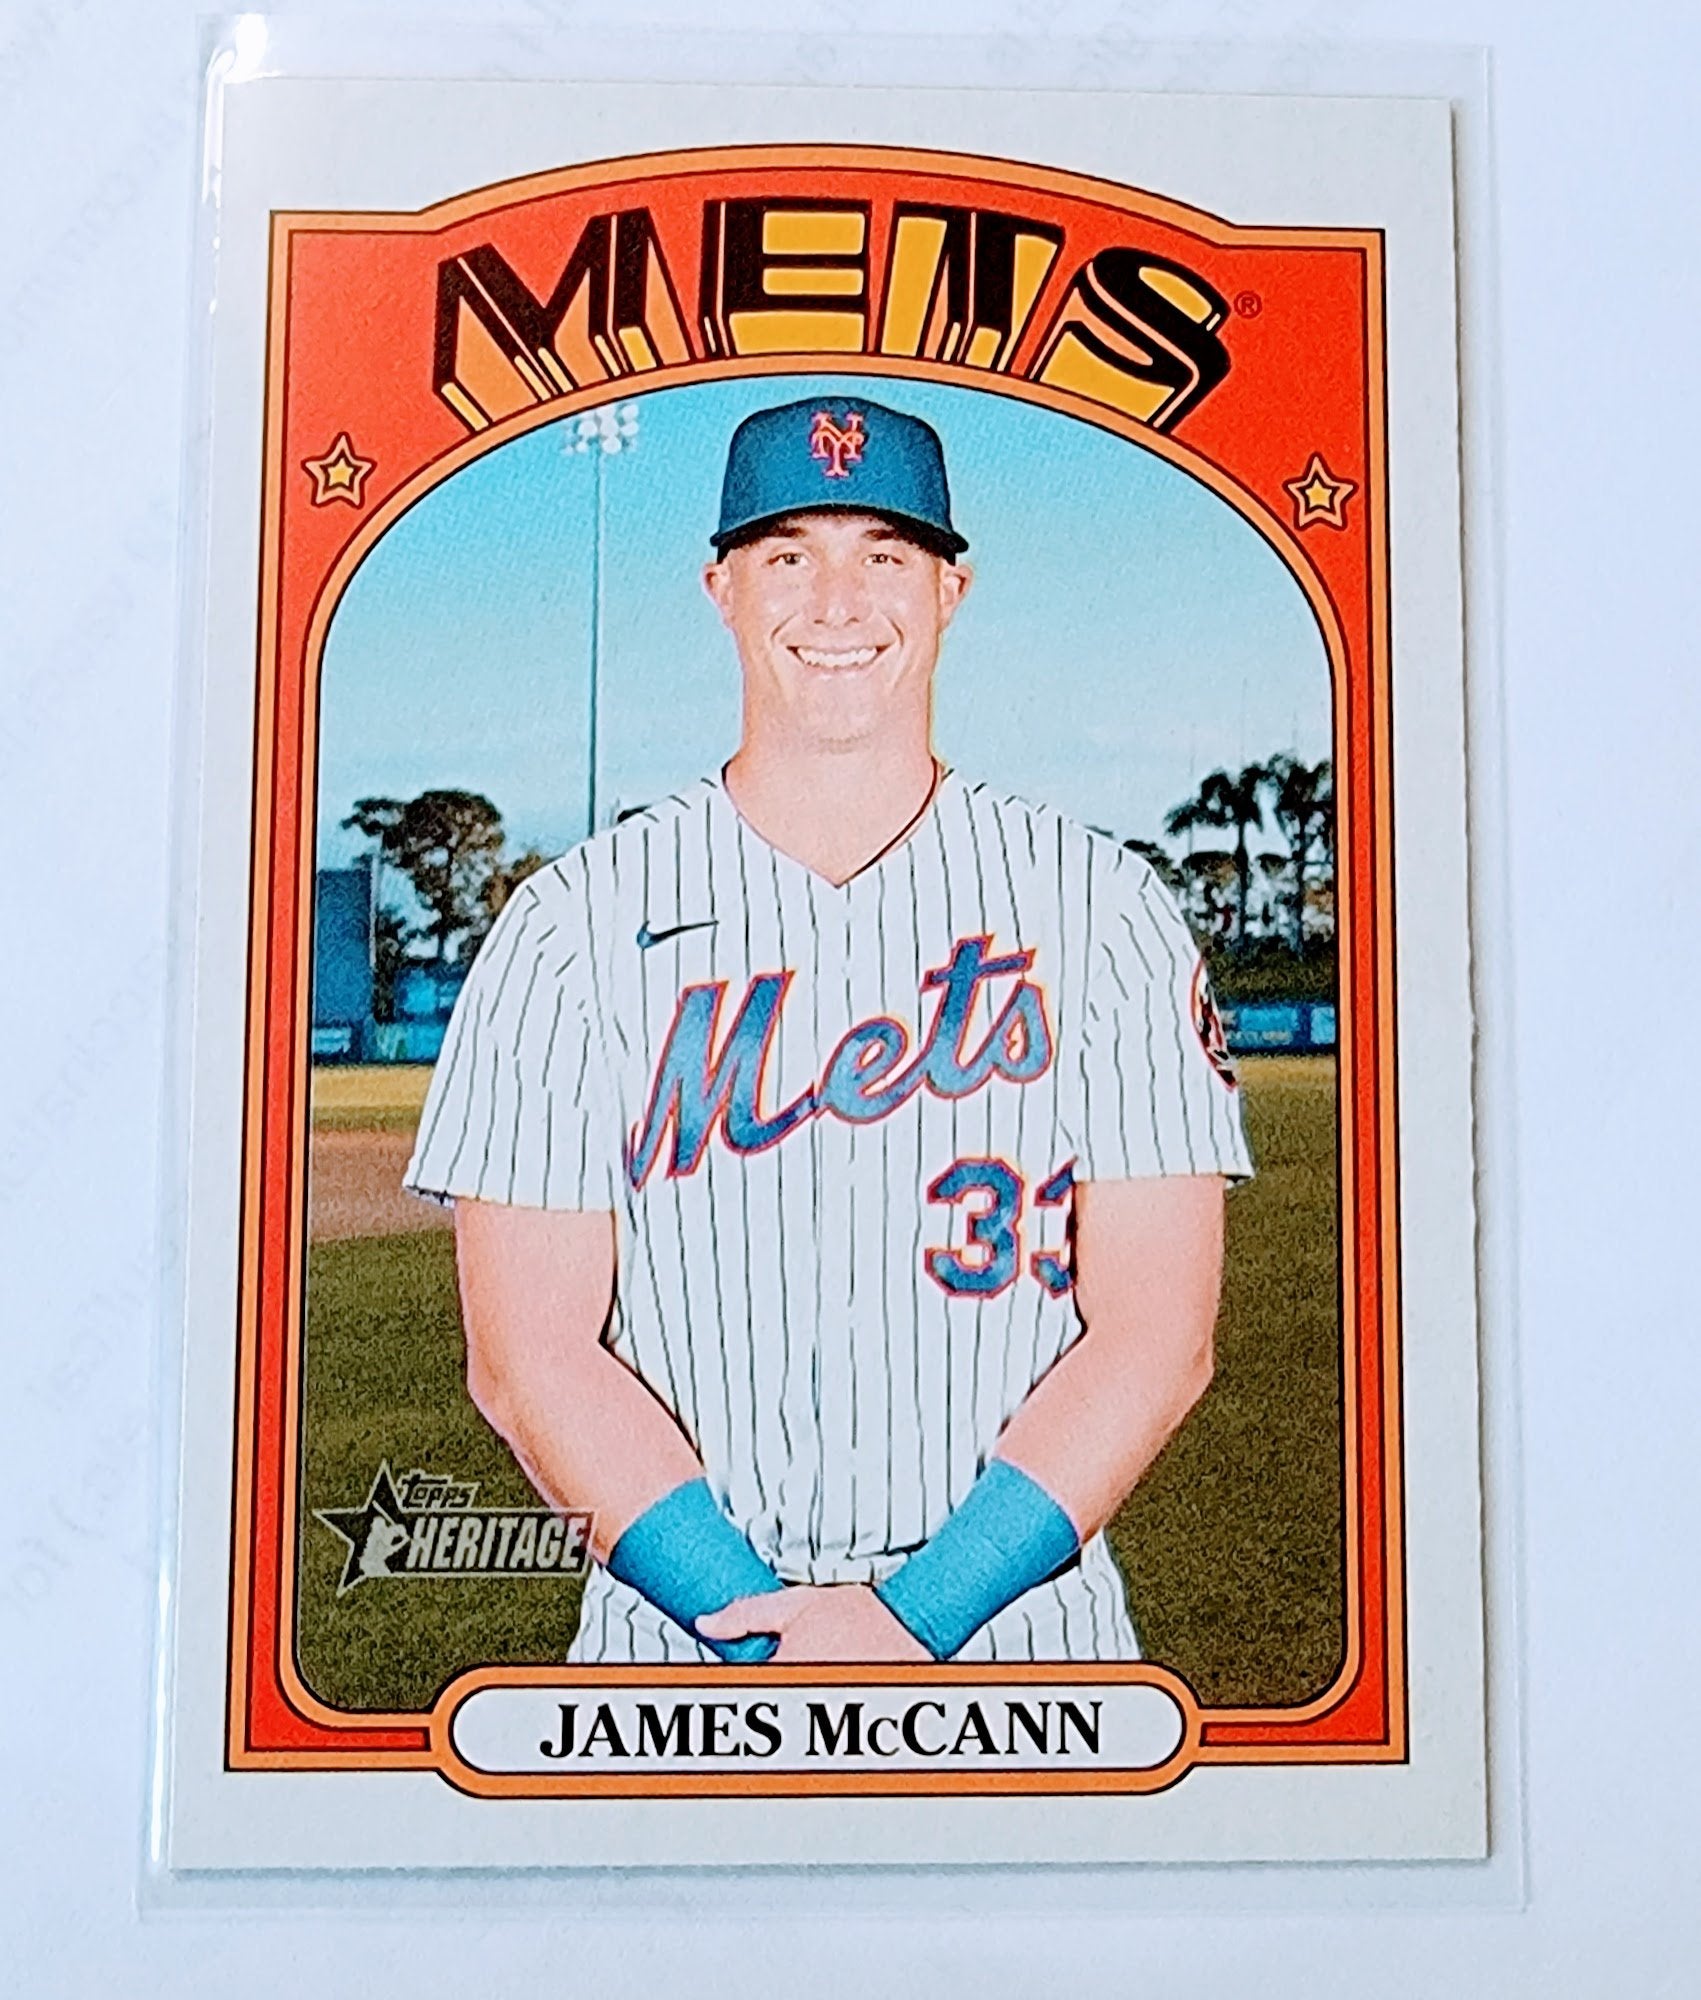 2021 Topps Heritage James McCann Baseball Trading Card MCSC1 simple Xclusive Collectibles   